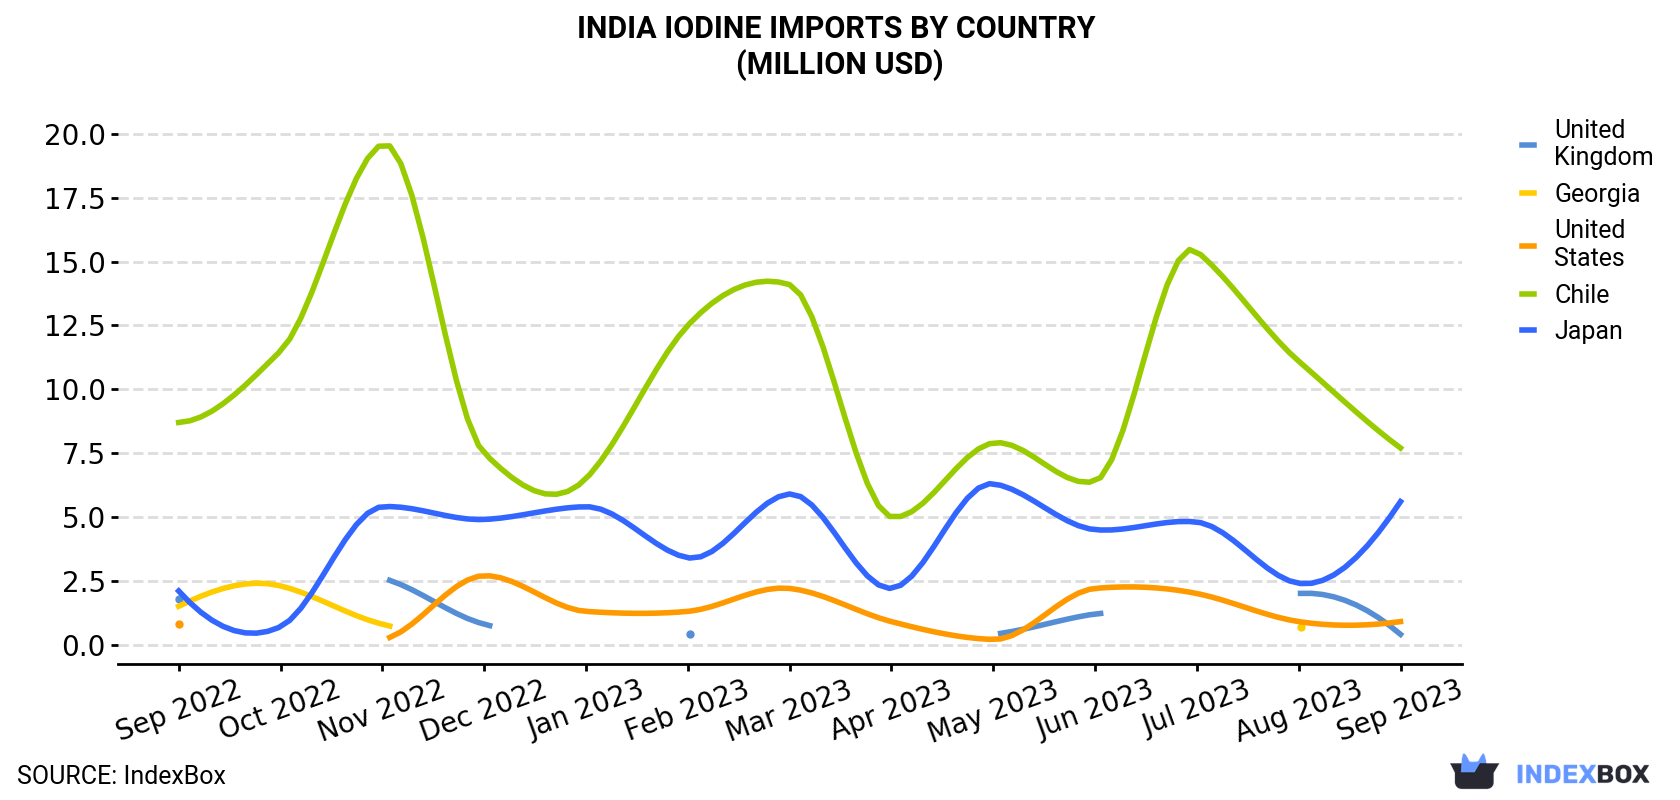 India Iodine Imports By Country (Million USD)